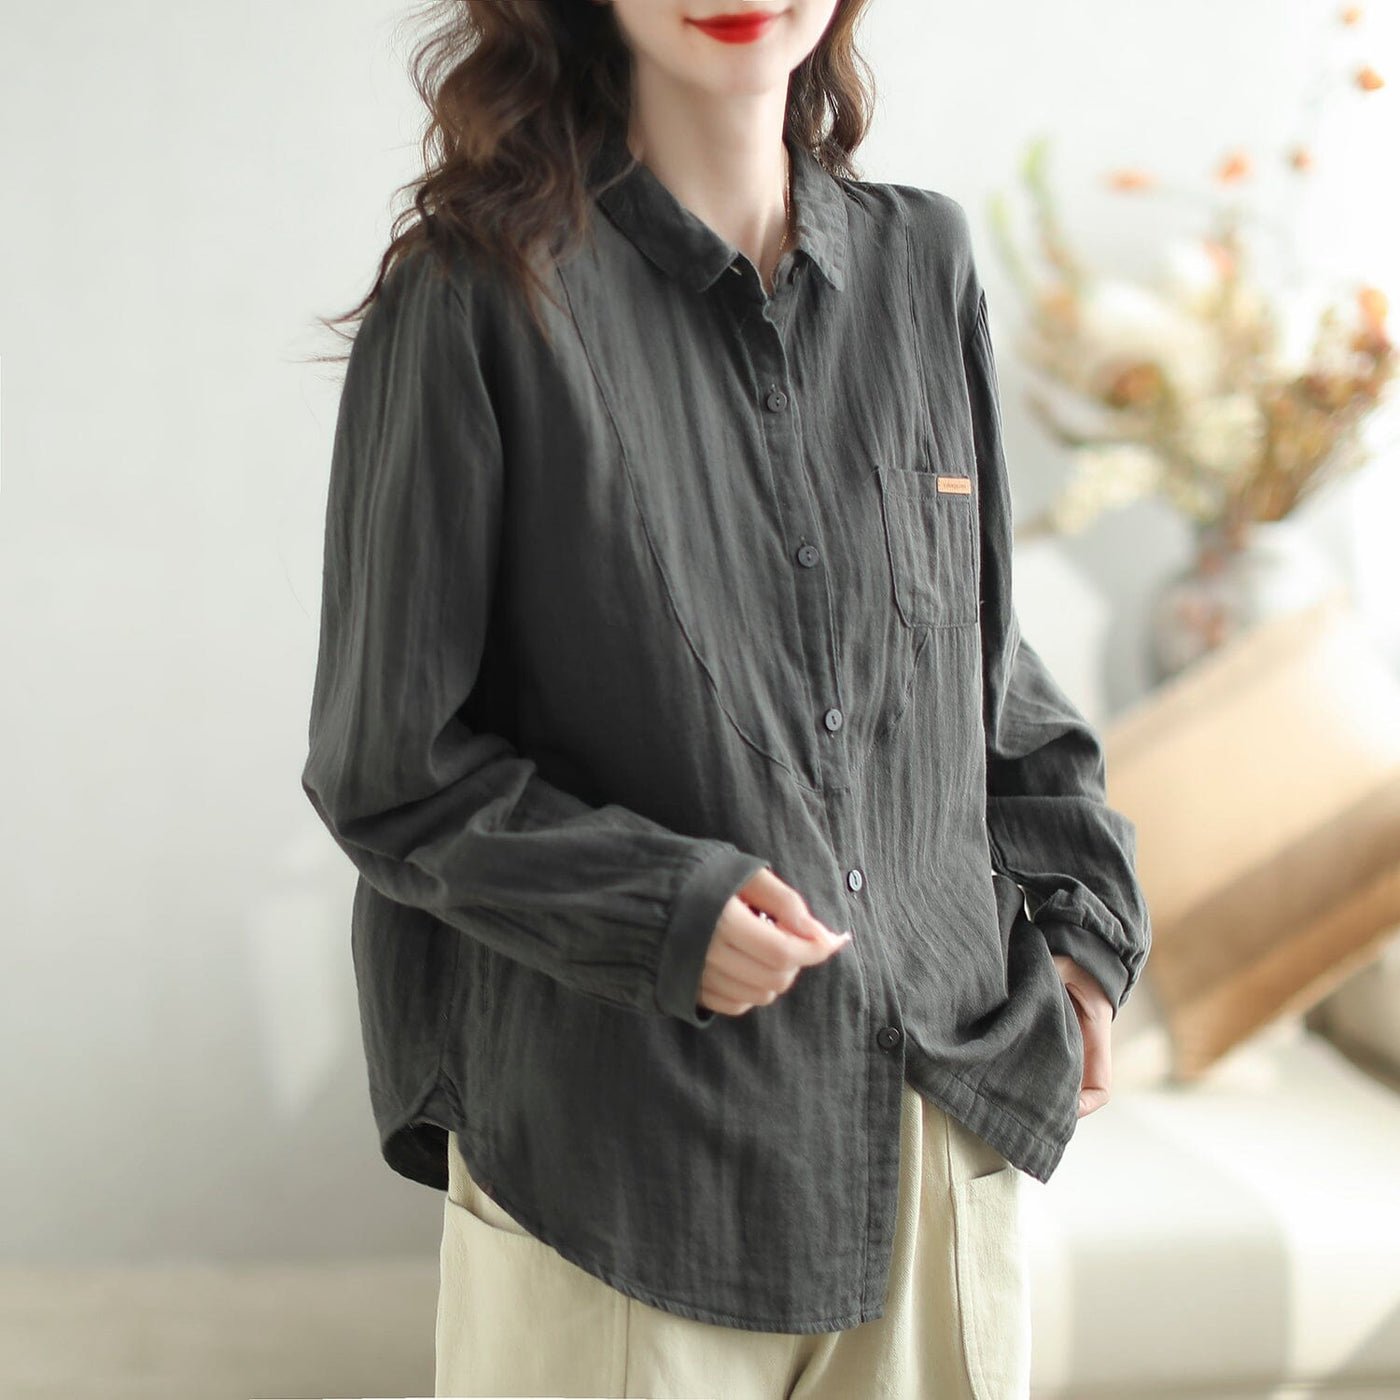 Women Casual Loose Solid Cotton Autumn Blouse